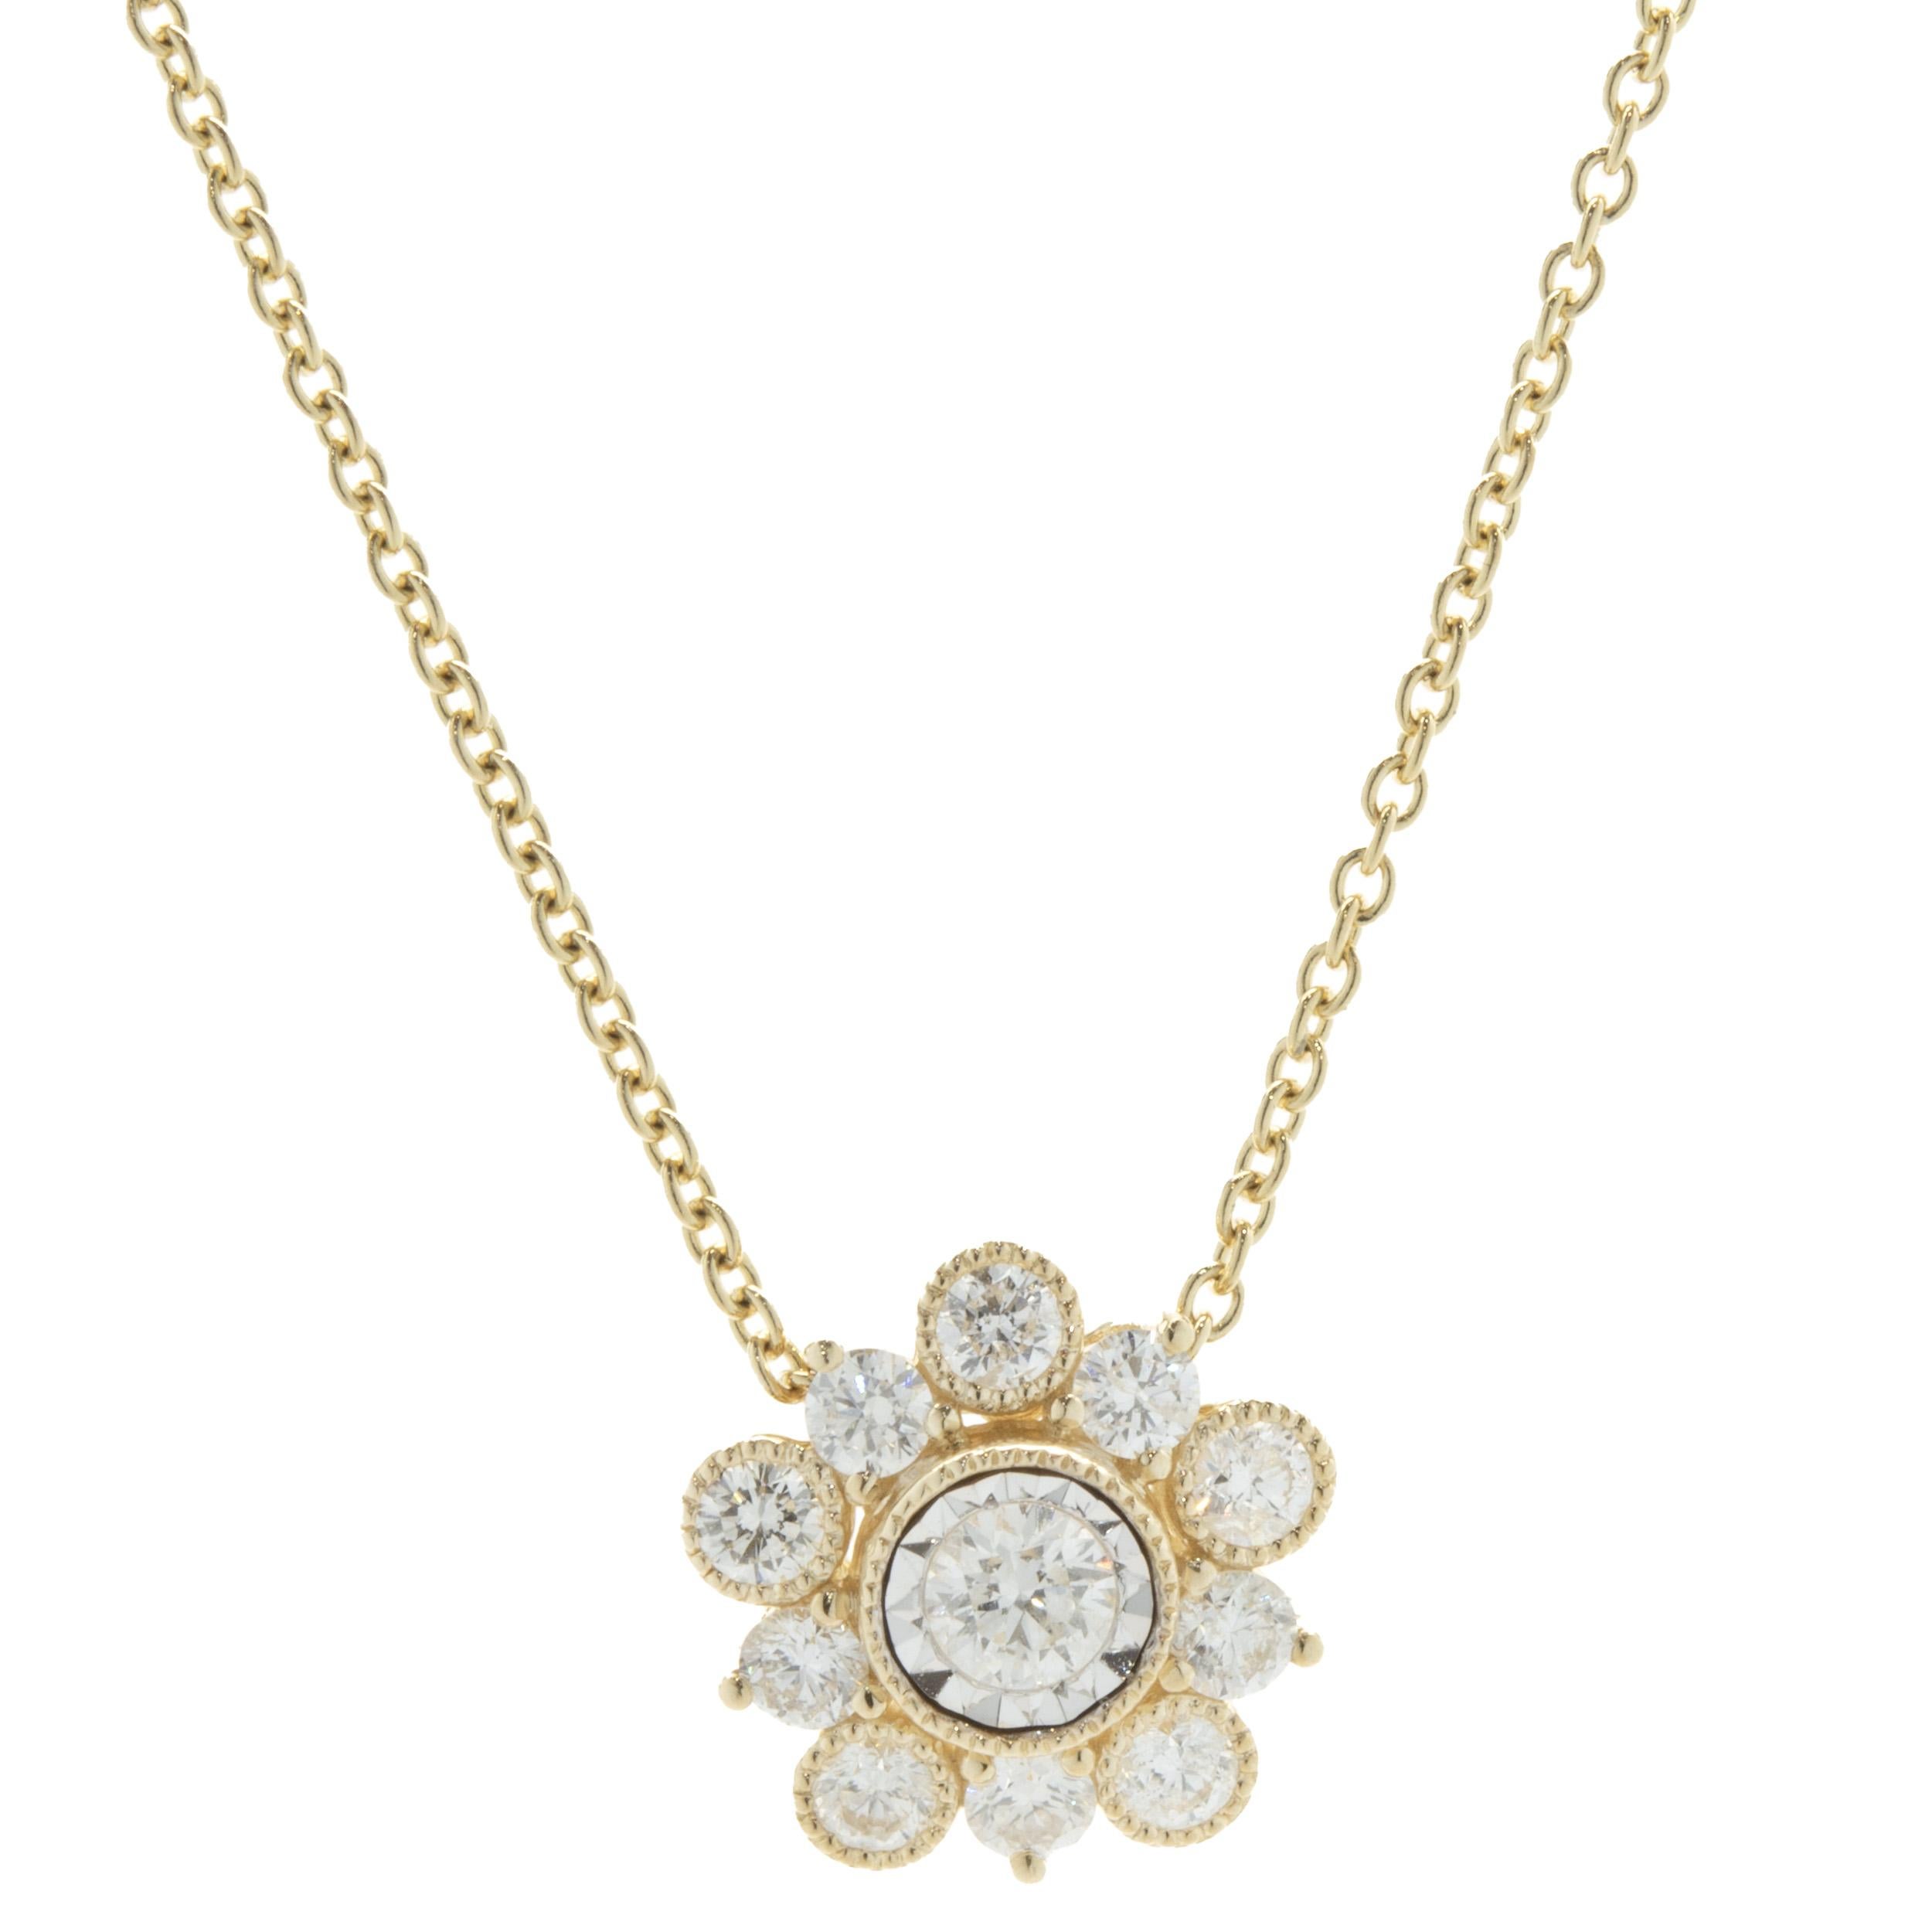 Designer: custom design
Material: 14K yellow gold
Diamond: 11 round brilliant cut = 0.52cttw
Color: G
Clarity: SI1
Dimensions: necklace measures 18-inches in length 
Weight: 3.22 grams